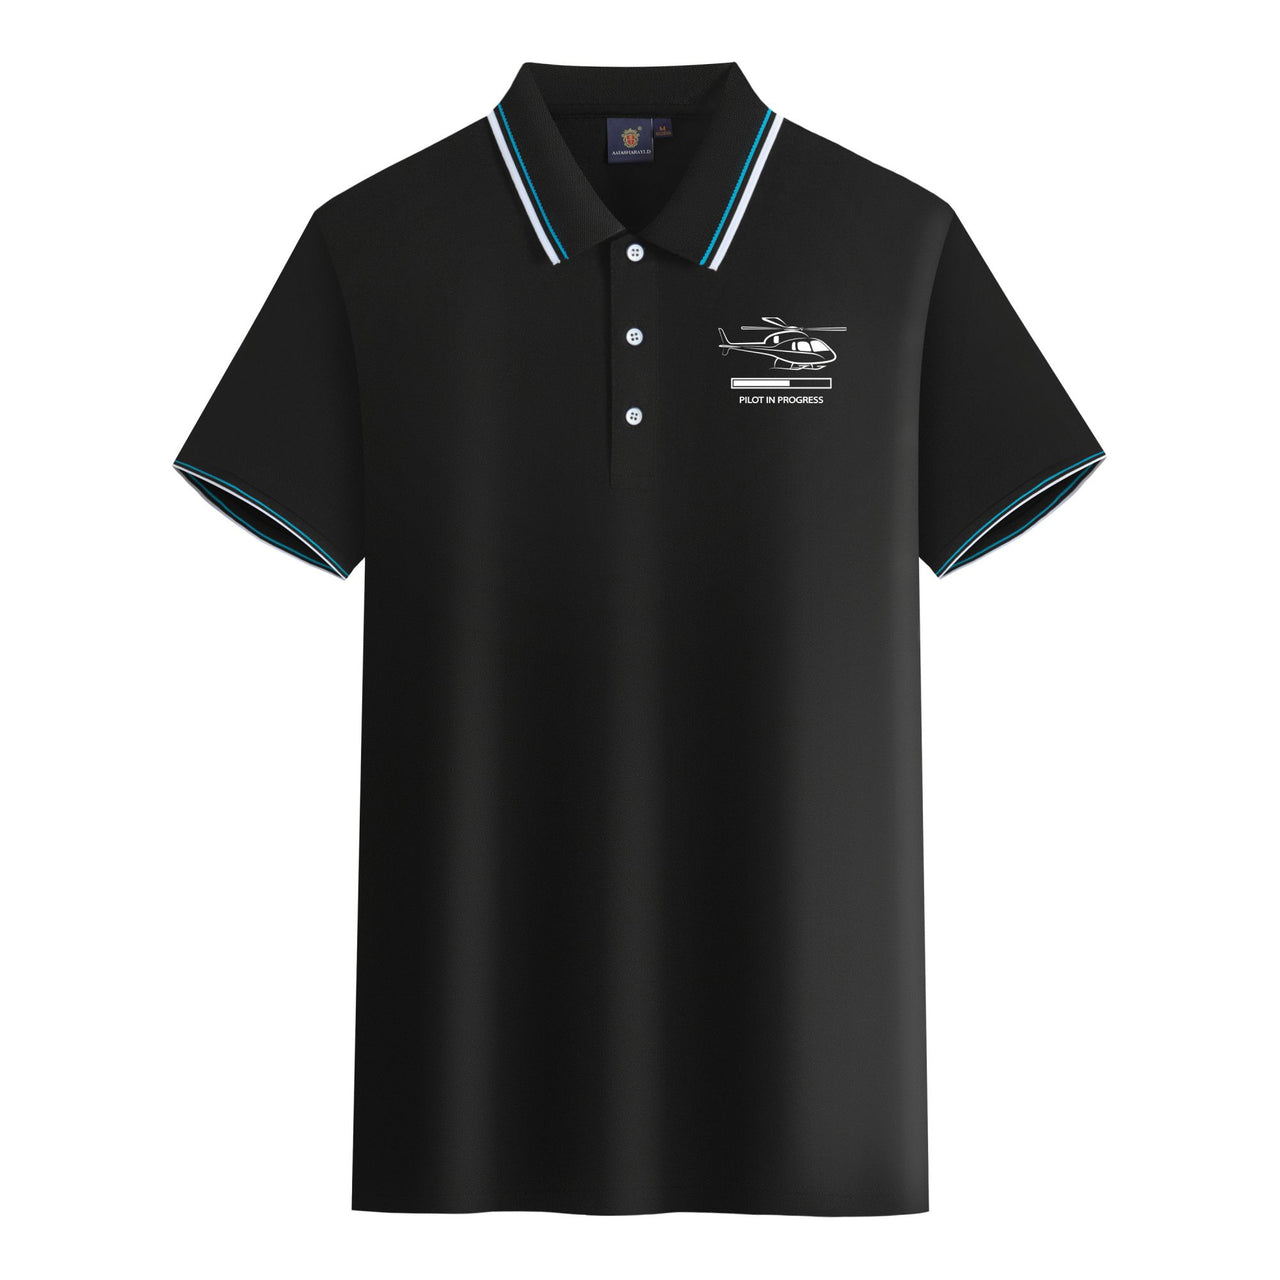 Pilot In Progress (Helicopter) Designed Stylish Polo T-Shirts